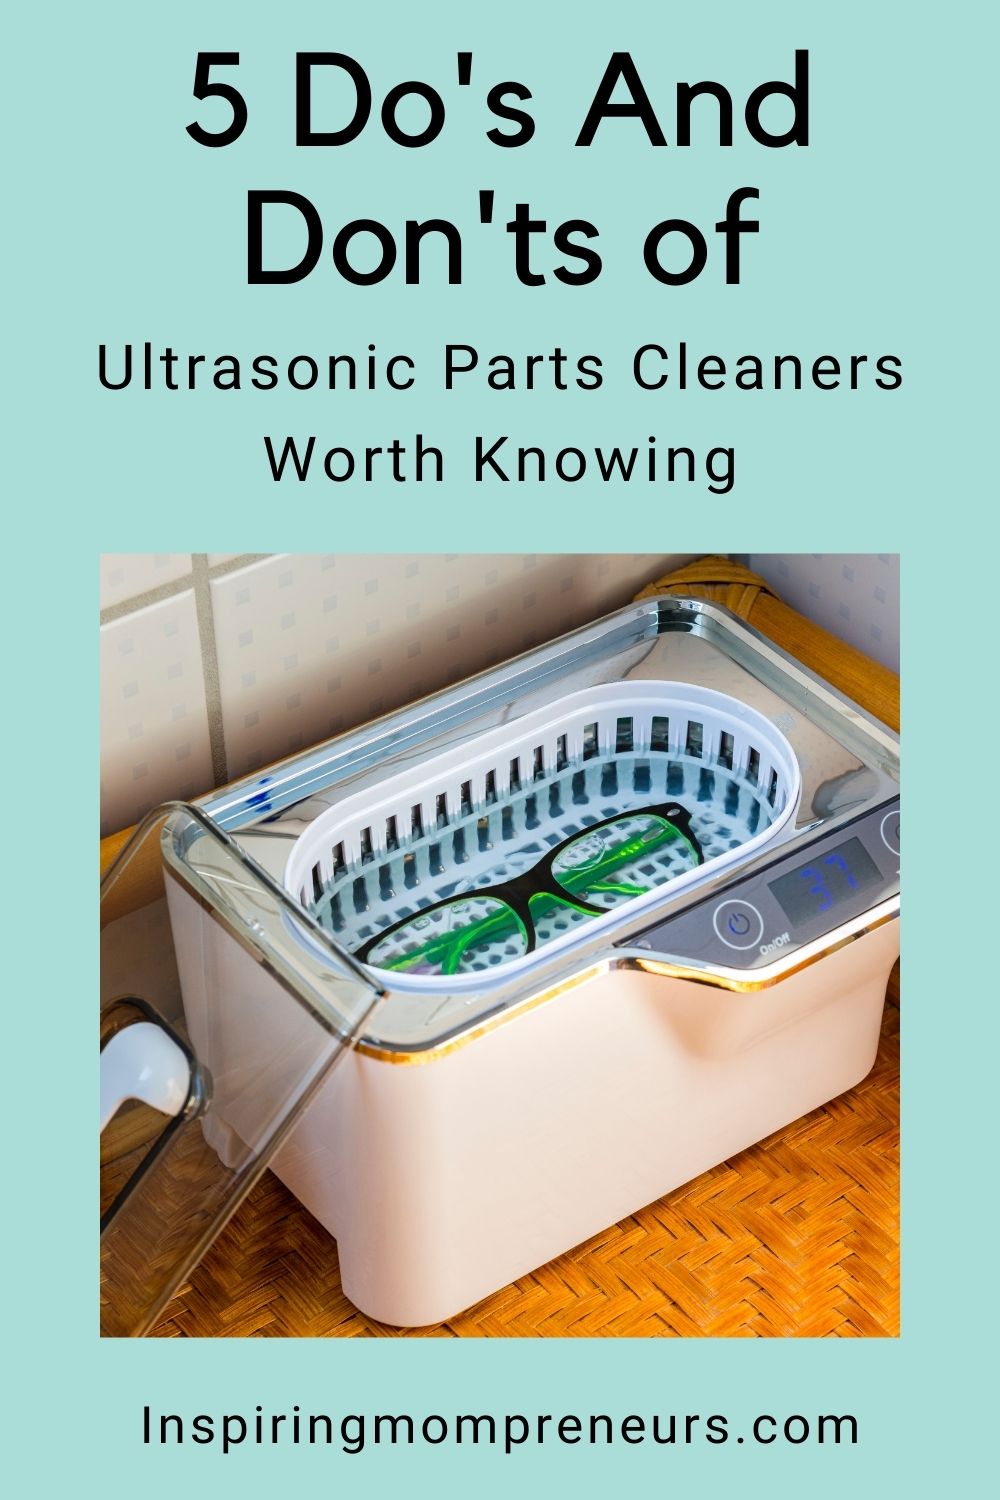 ultrasonic-parts-cleaners